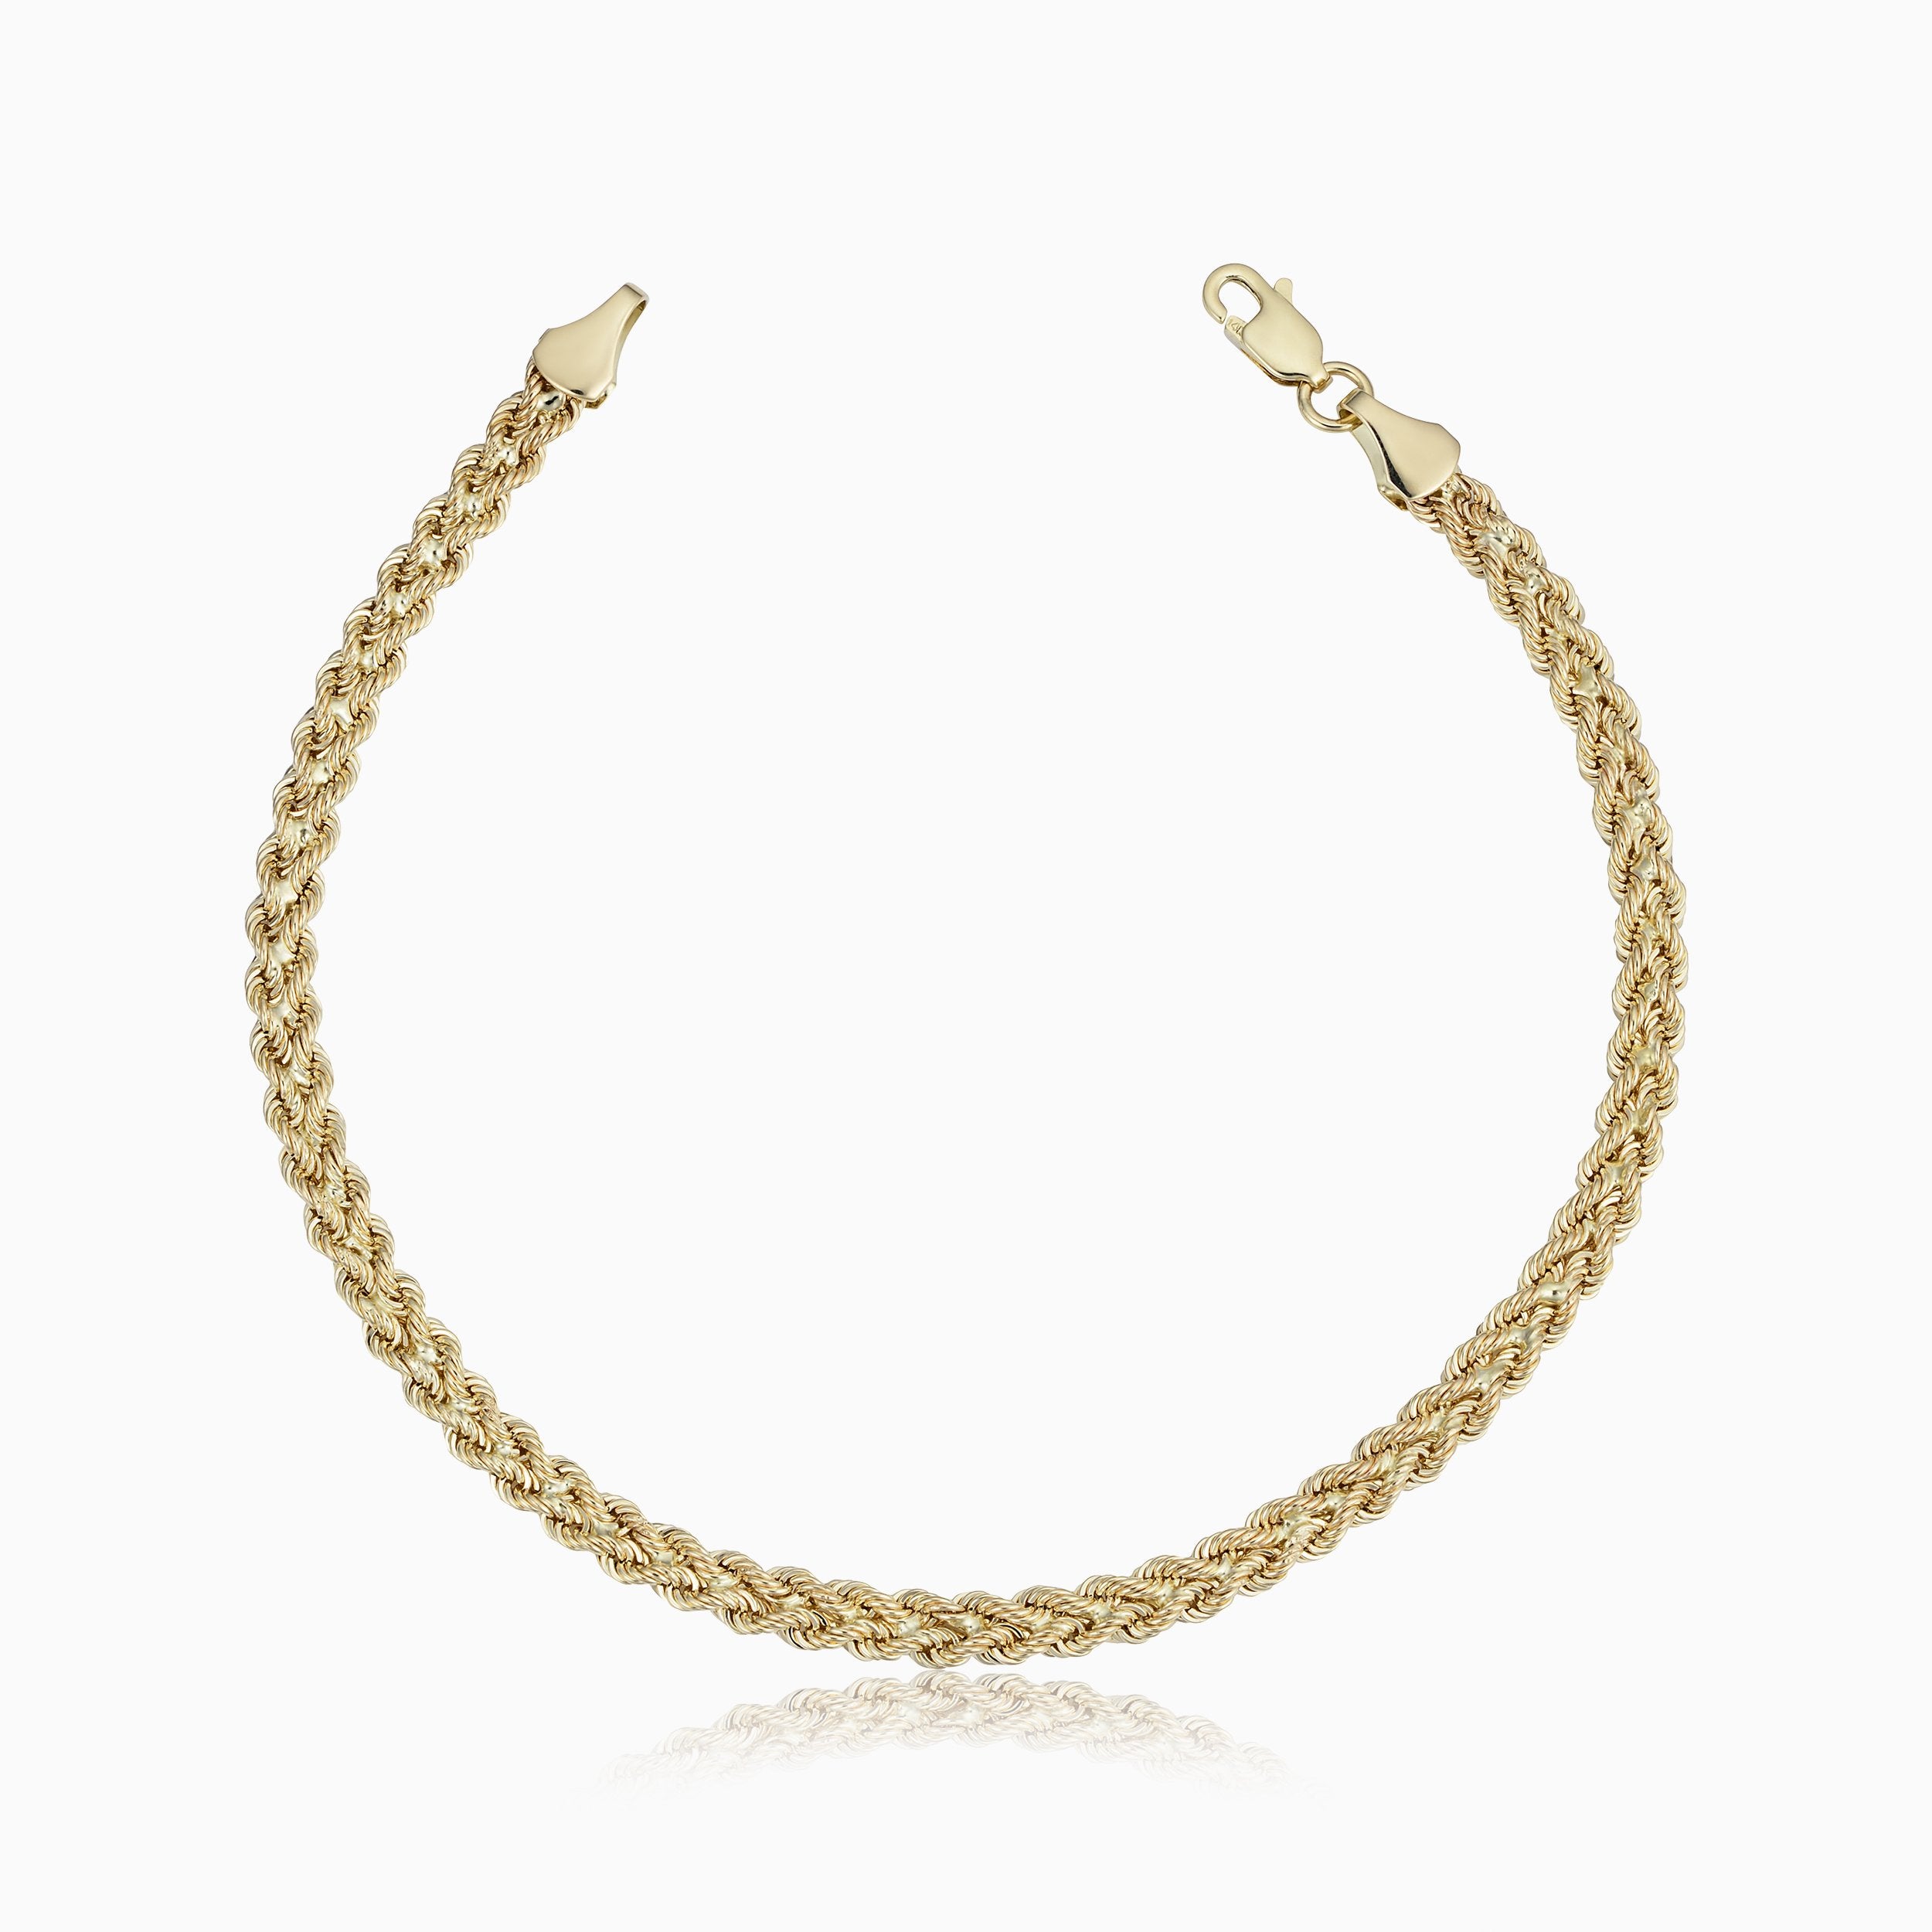 Roman Rope Necklace Yellow Gold / 14K Solid Gold / 16 | Real Gold Jewelry by Oradina